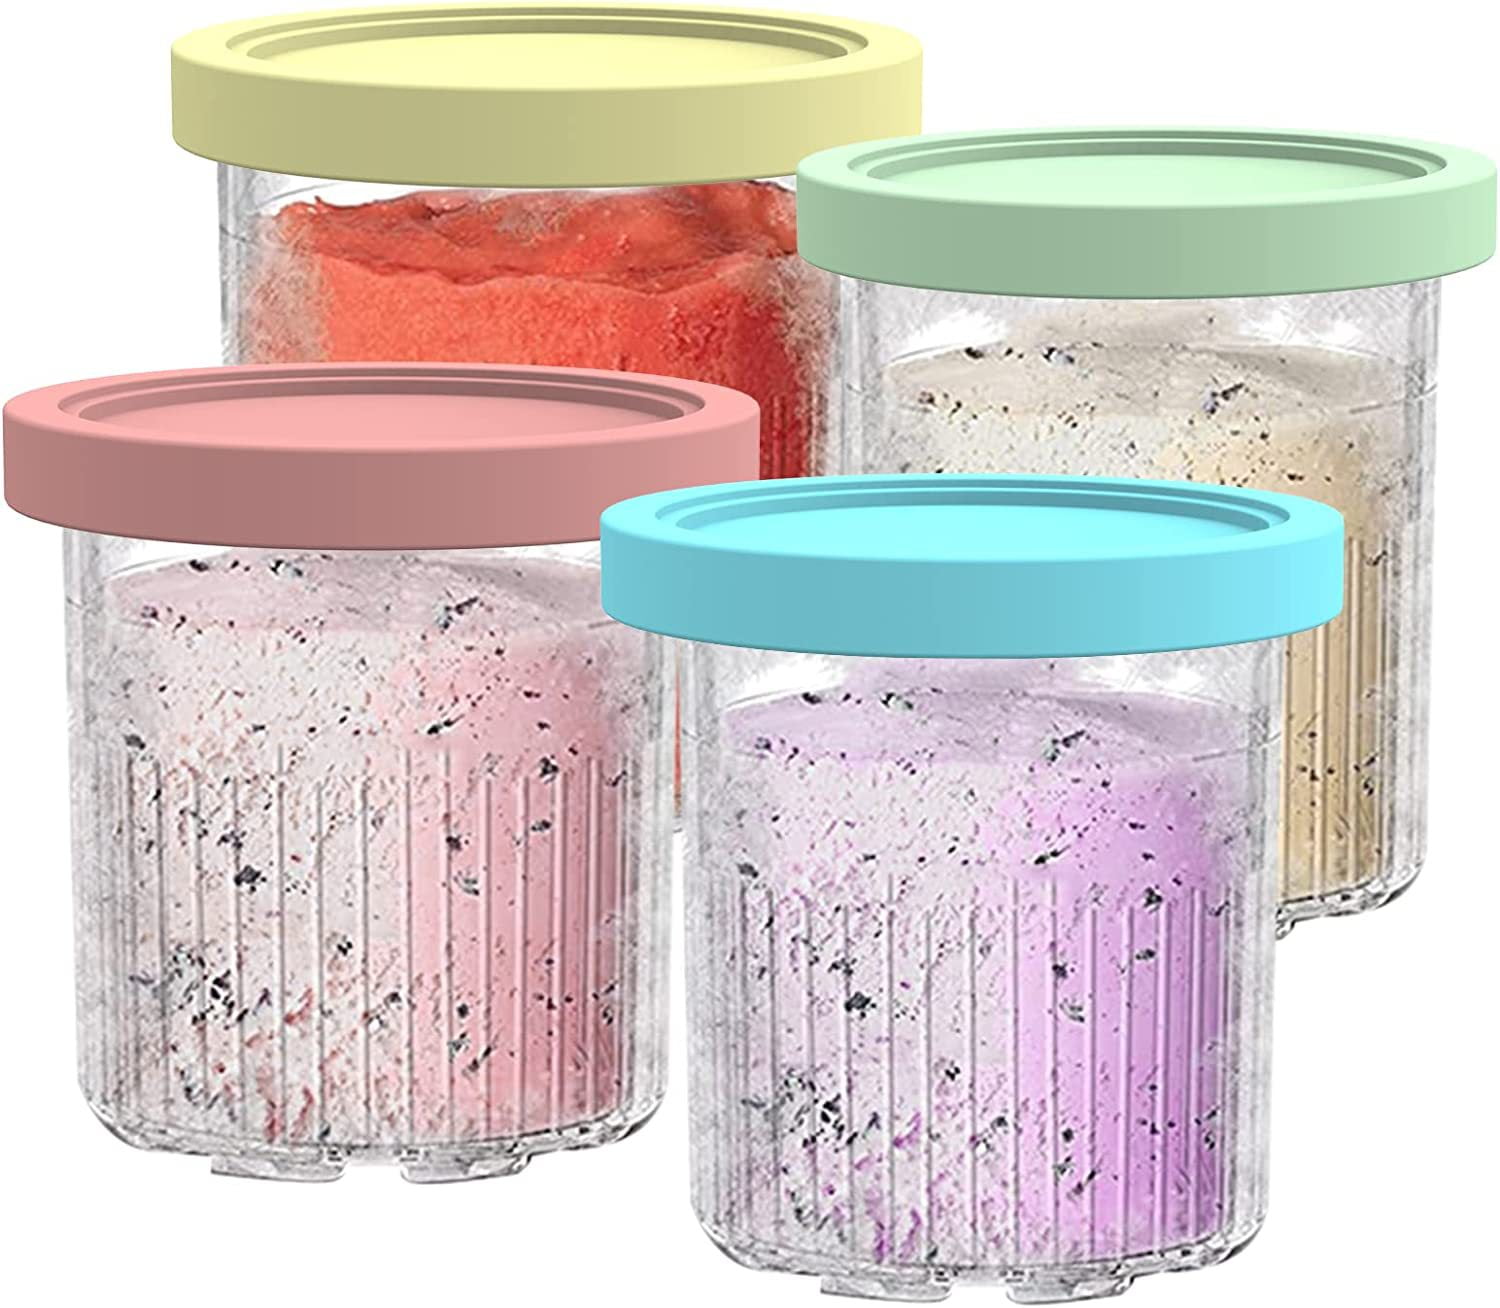  For Ninja Creami Deluxe Pints- 4 Pack, NC500 NC501 Ice Cream  Pint fit for Ninja Delux Ice Cream Maker, For Ninja Creami Deluxe  Containers Hold 24 Ounces of Food, Dishwasher Safe